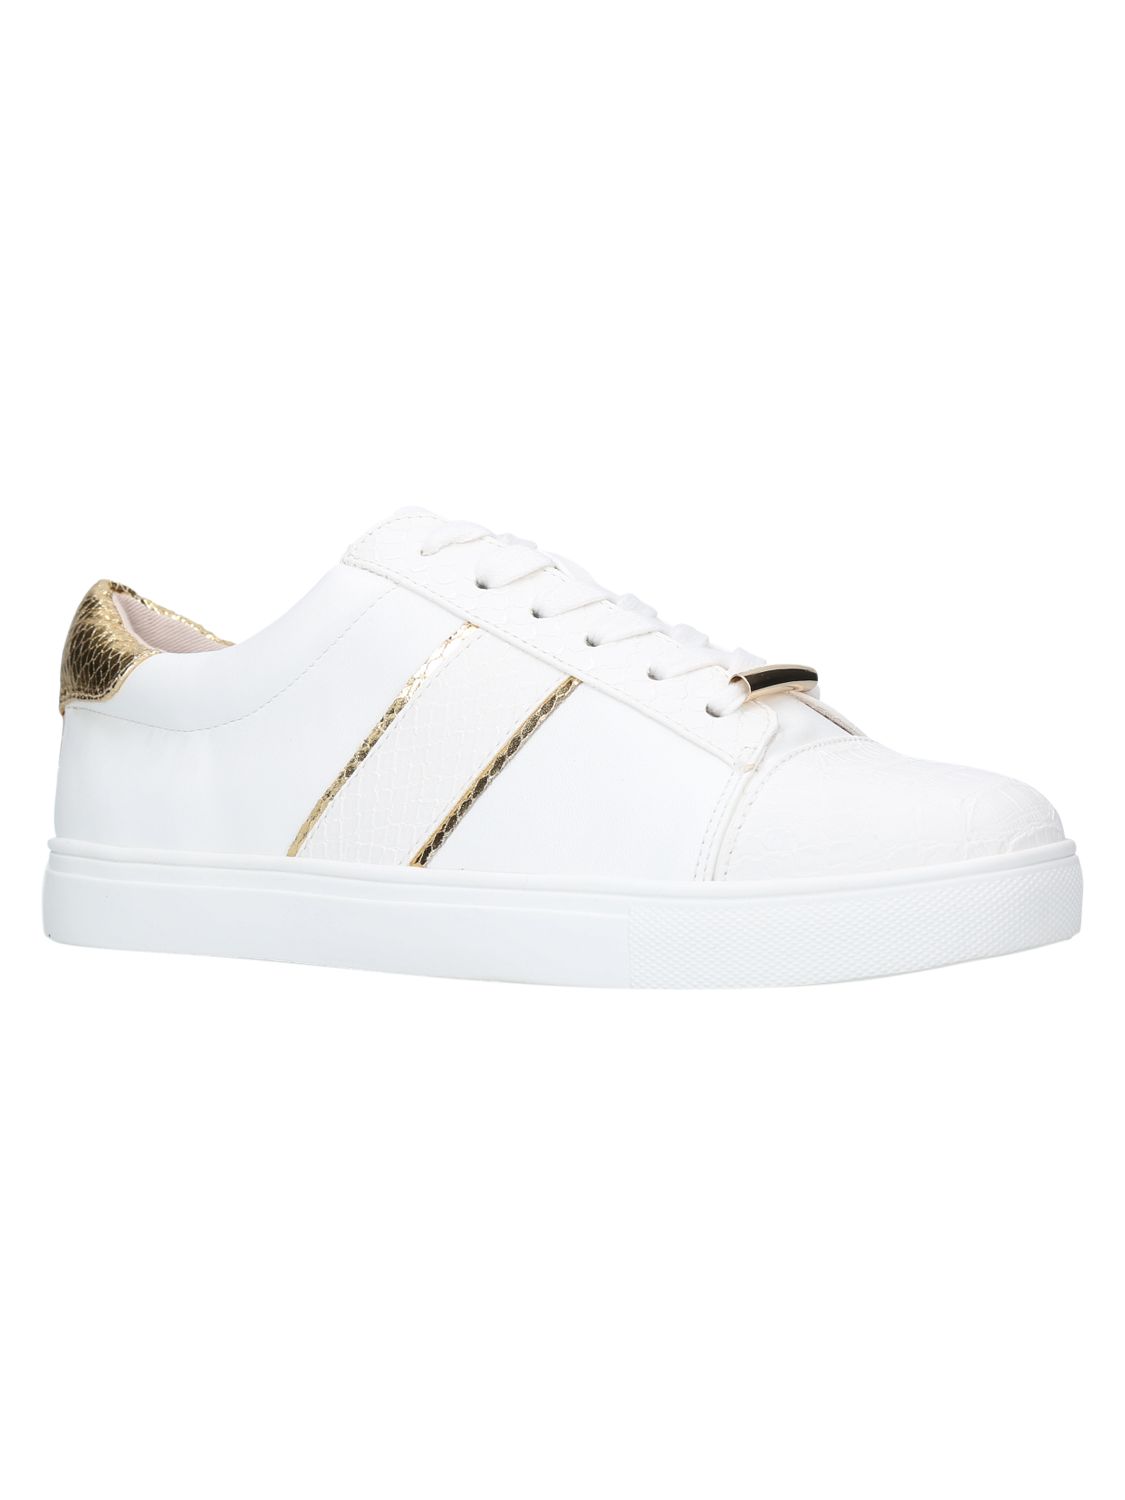 Miss KG Lyra Trainers, White